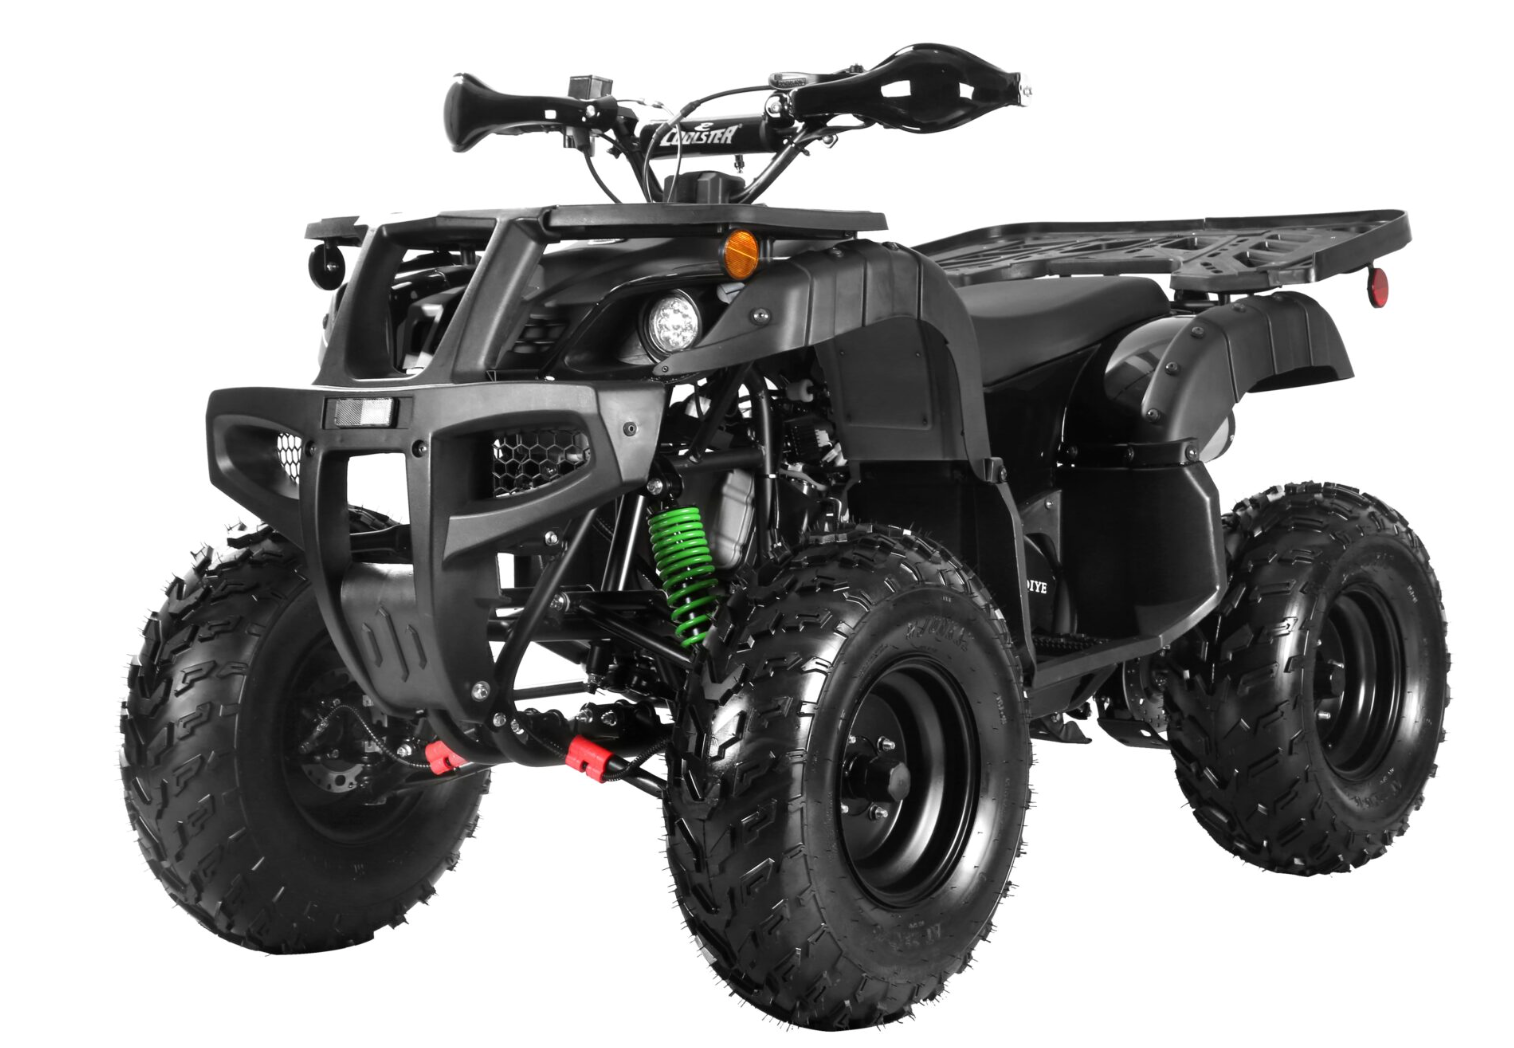 Coolster 3200U 175CC Fully Automatic Full Sized Utility ATV